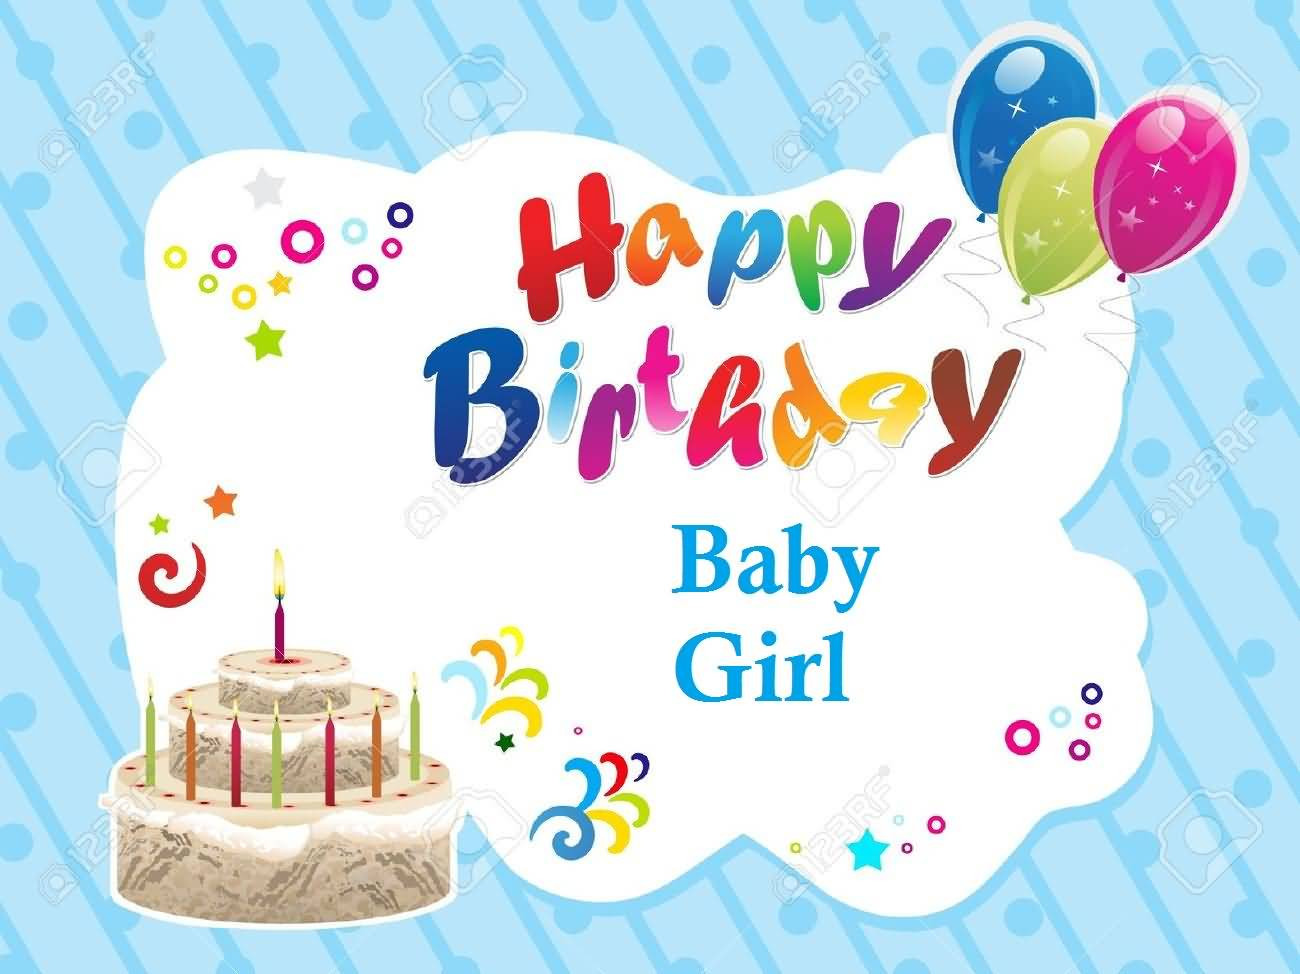 Birthday Wishes For Baby Girl
 Fabulous Happy Birthday Wishes For Baby Girl